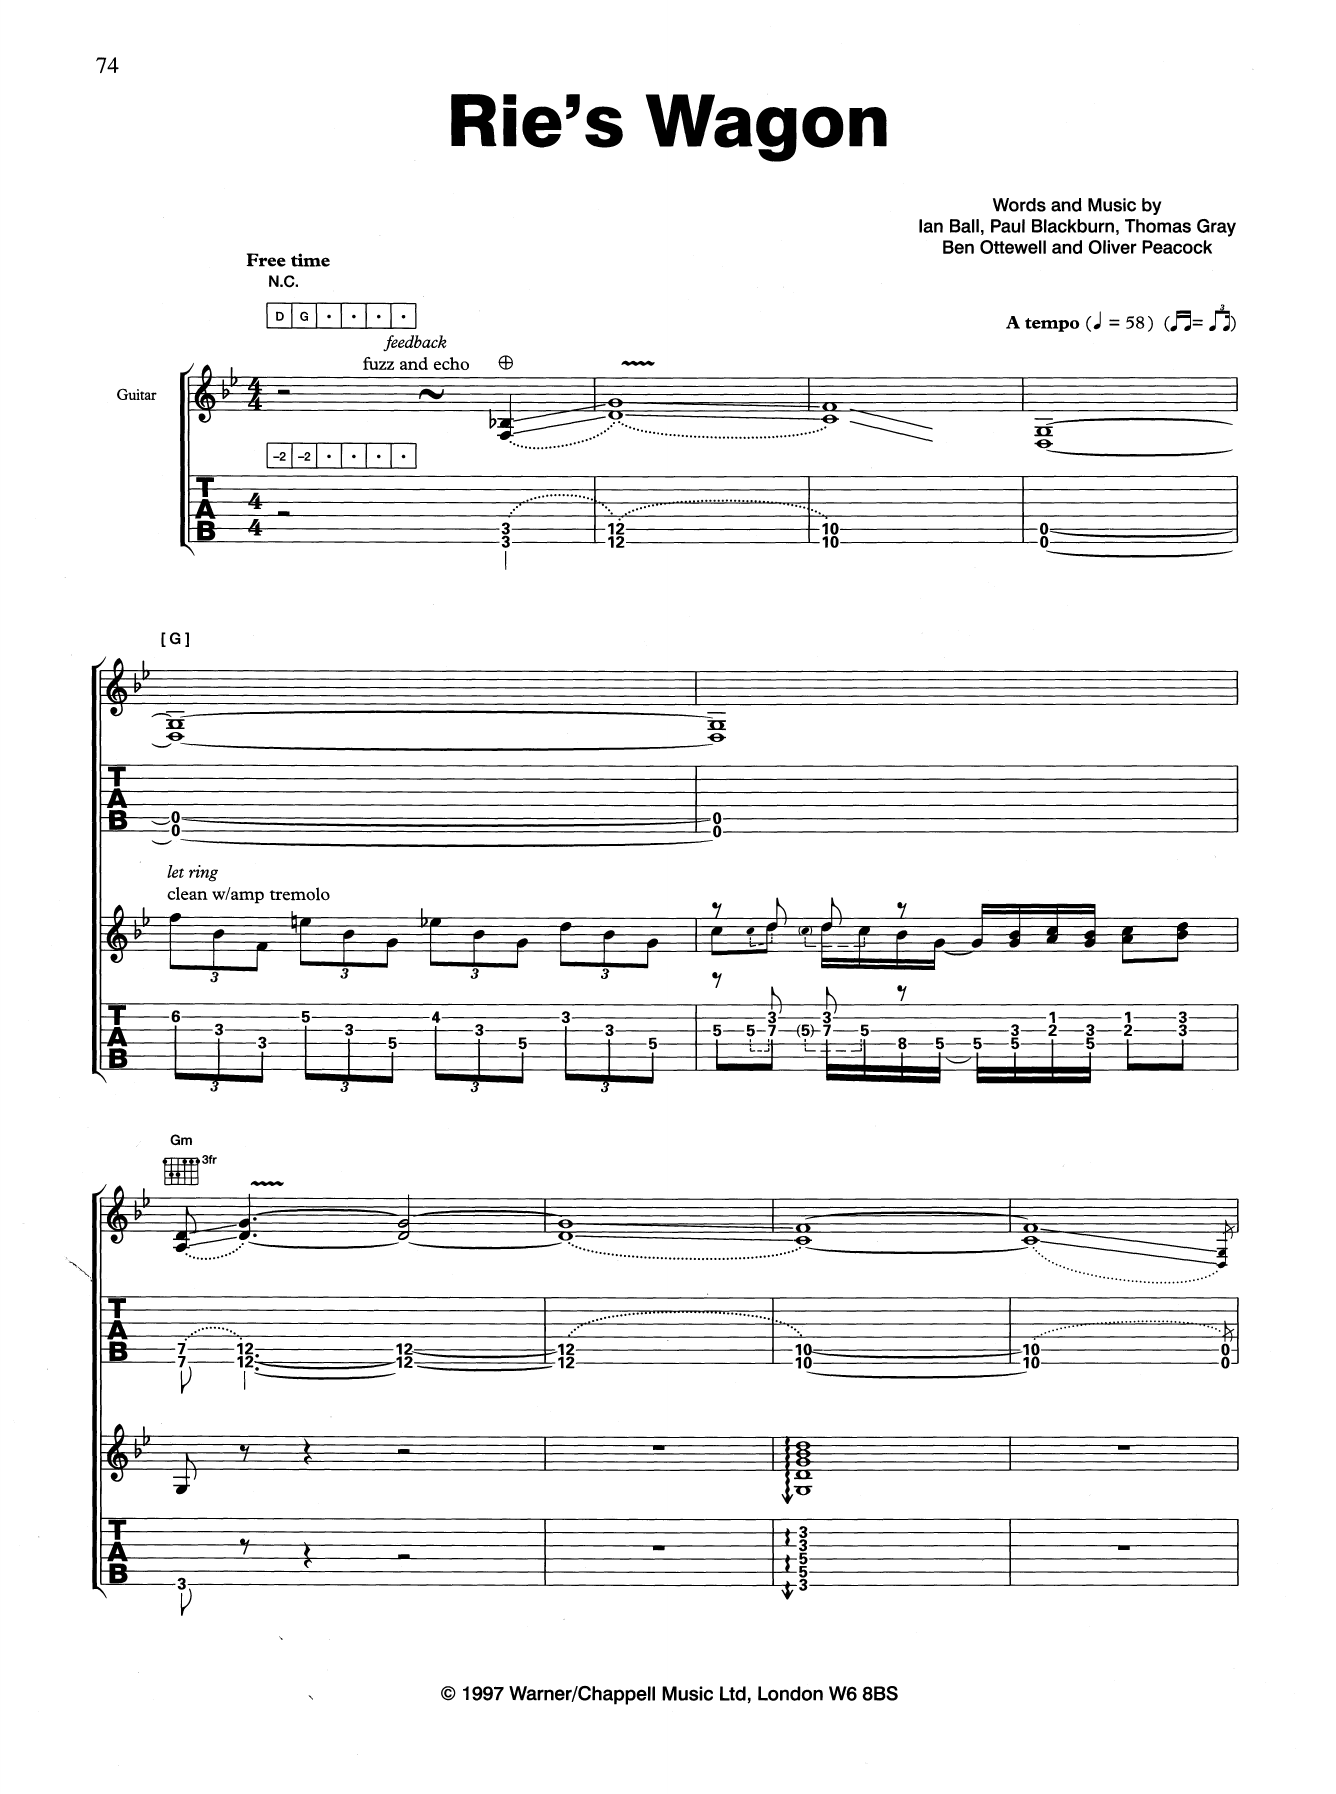 Download Gomez Rie's Wagon Sheet Music